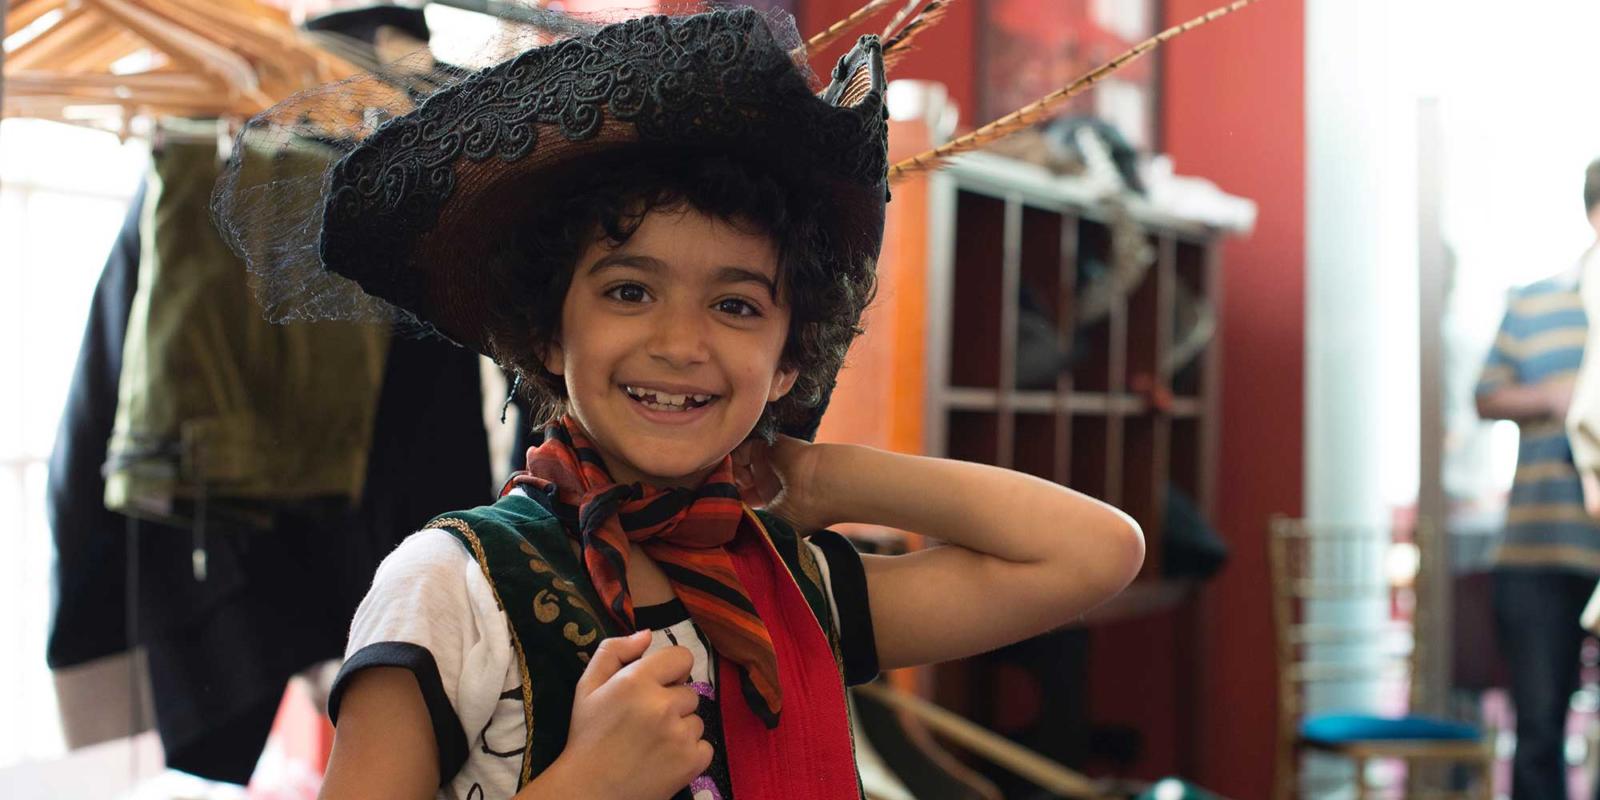 ENO Engage: Children take part in a Pirates of Penzance themed day for the Baylis Family Day (c) Sarah Ainslie